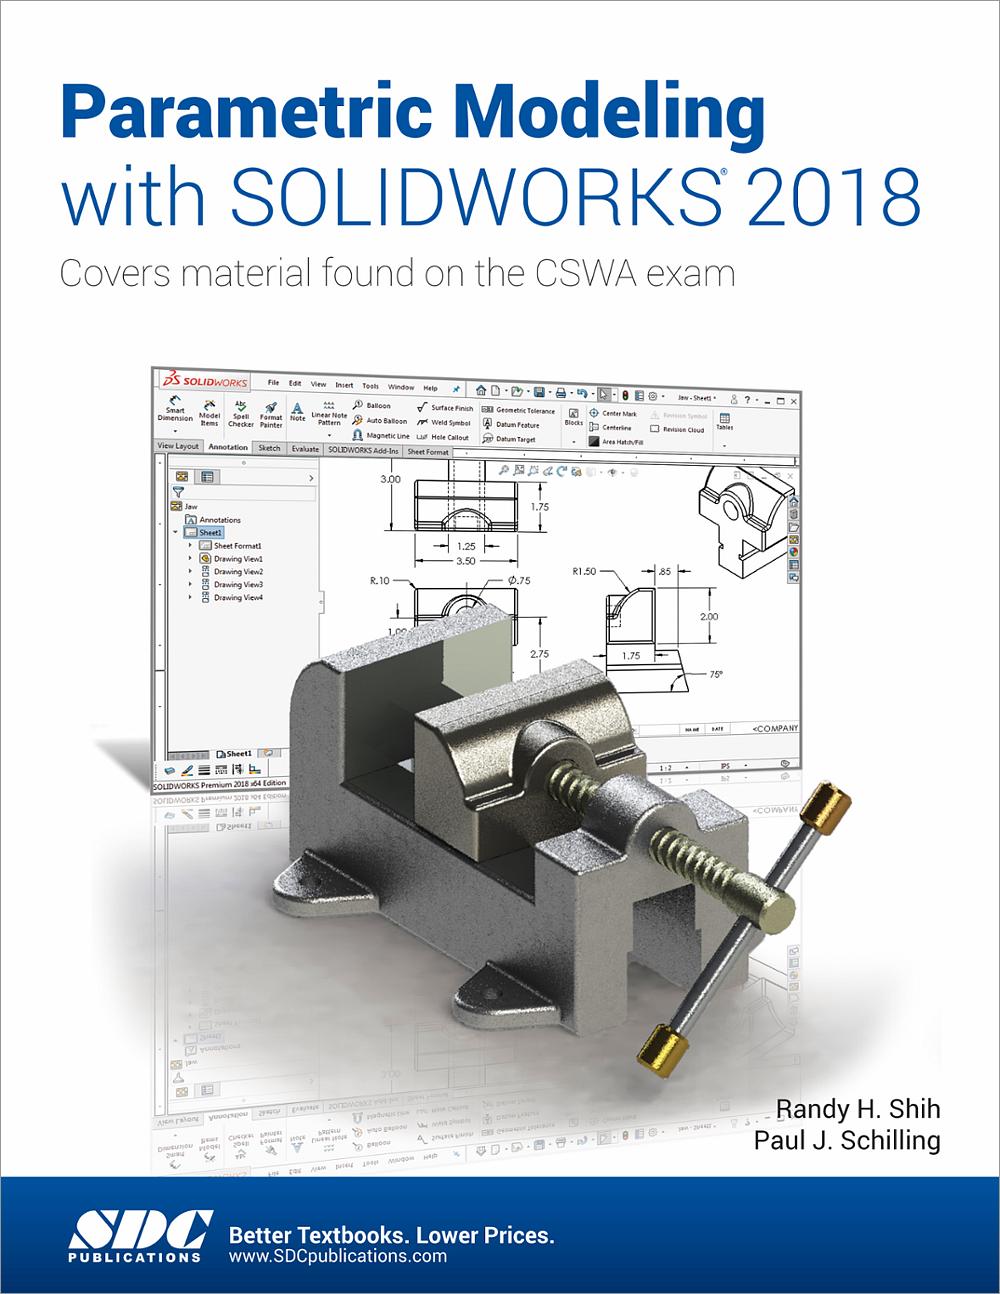 parametric modeling with solidworks 2018 pdf download